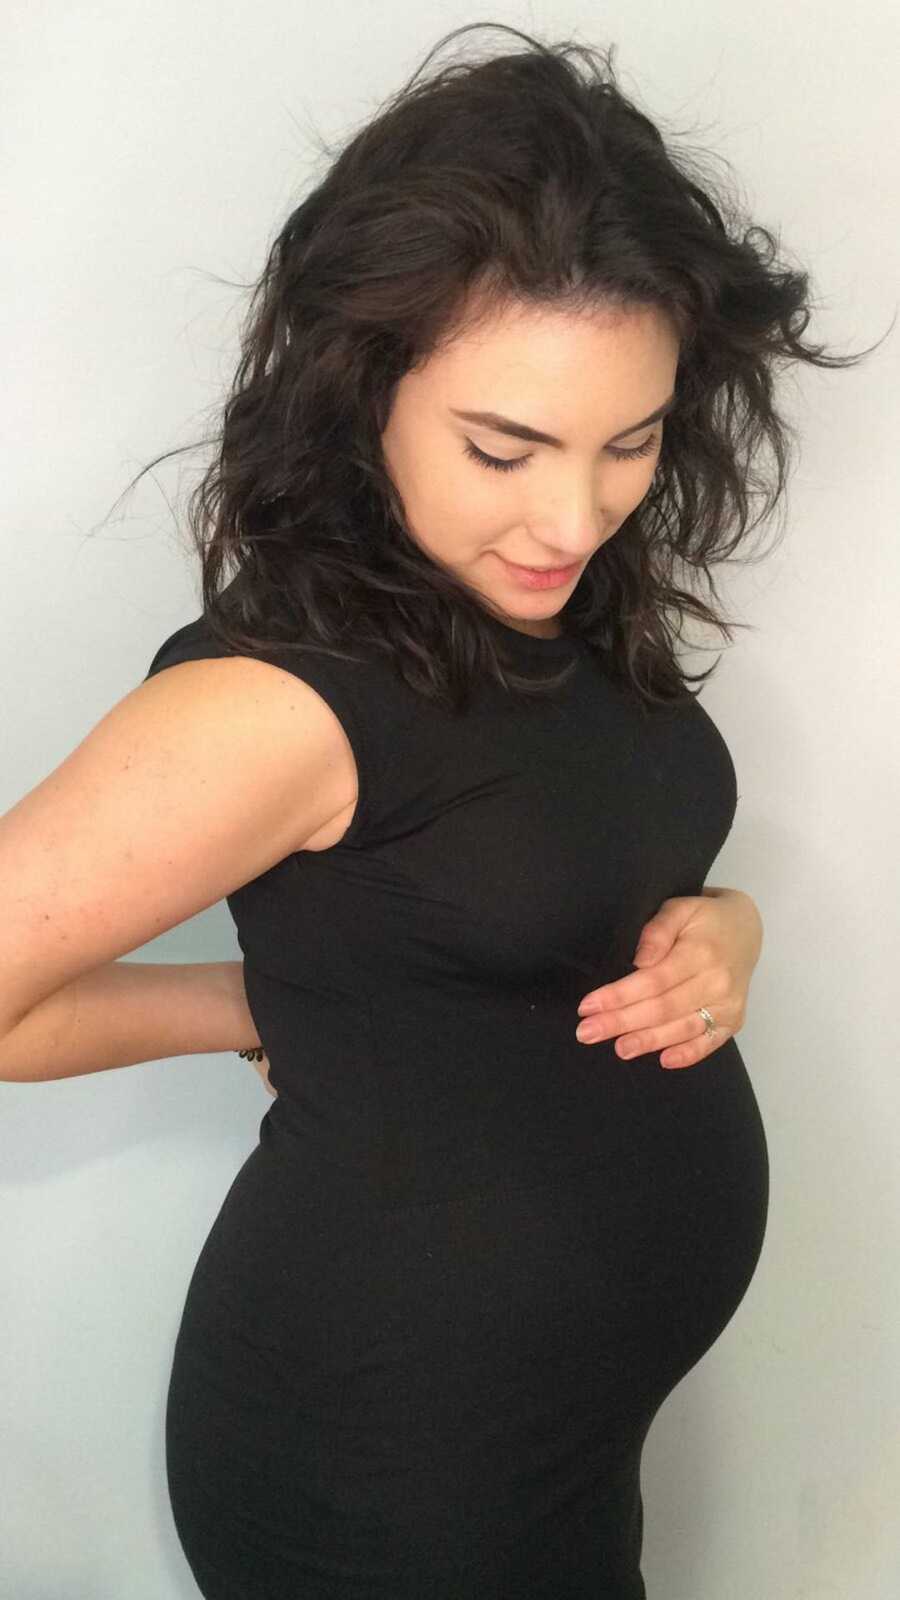 pregnant mom holding her bump